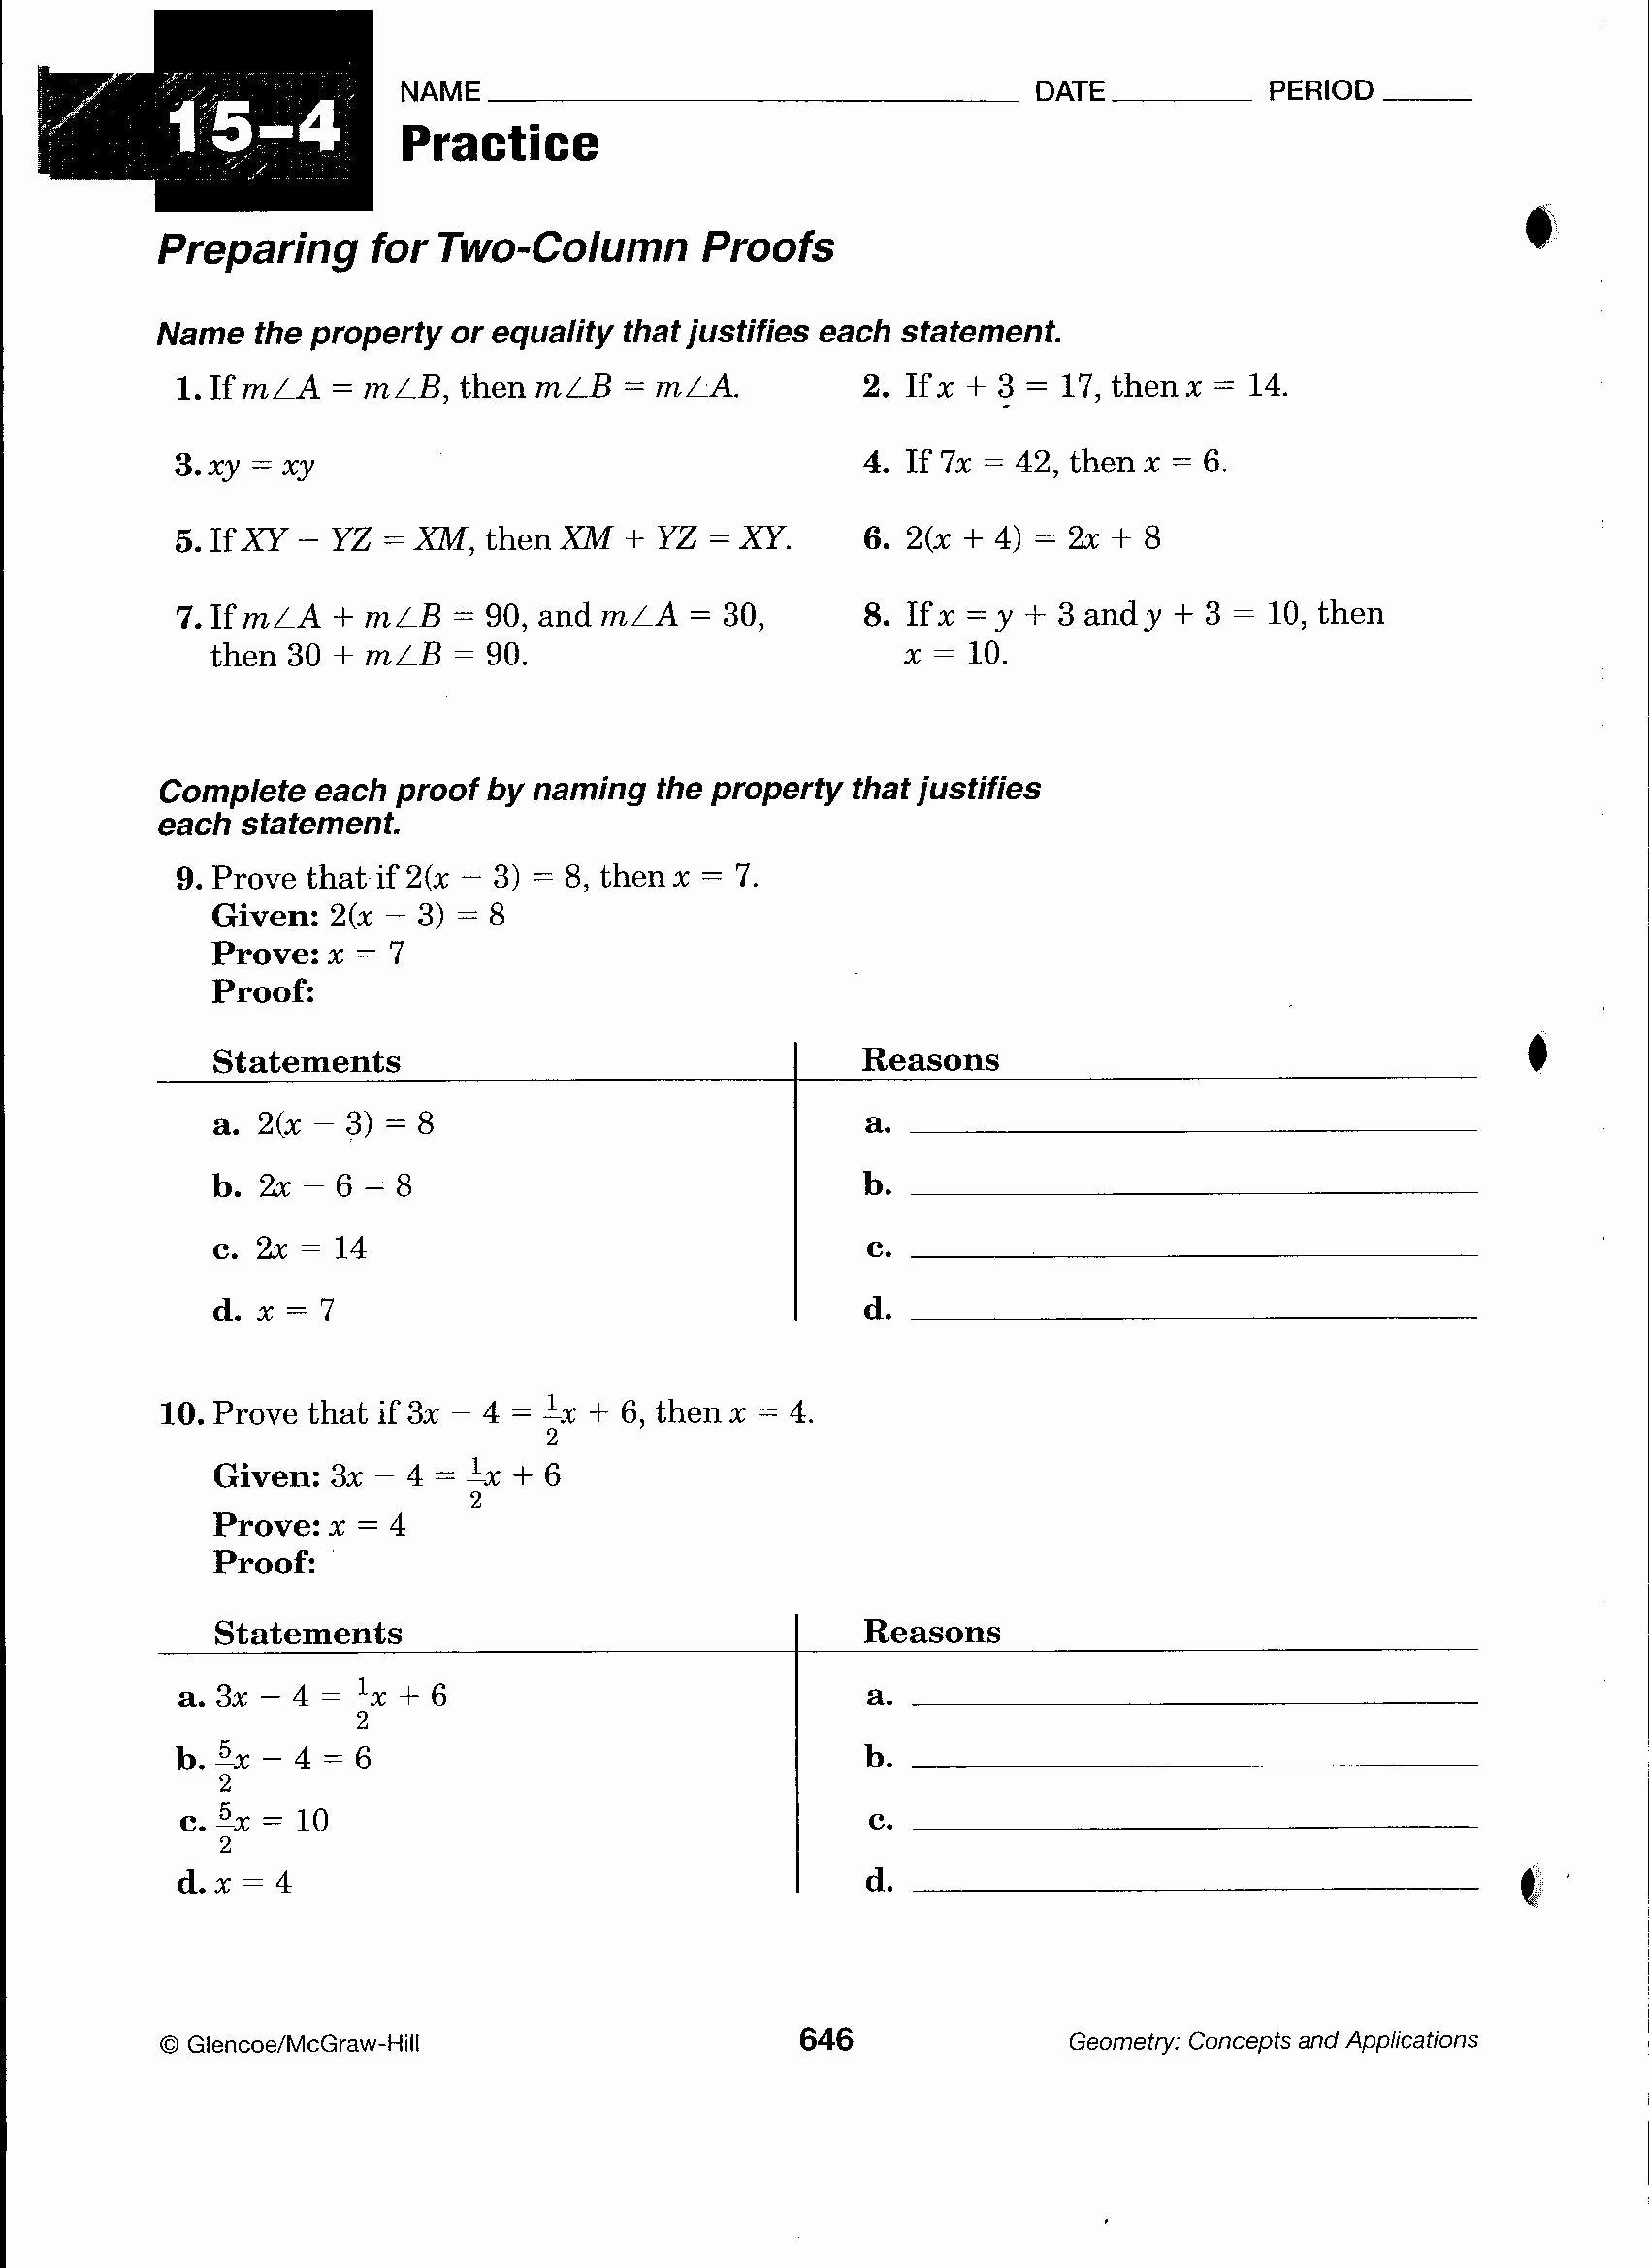 Geometric Proofs Worksheet with Answers Awesome Beginning Geometry Proofs Worksheets